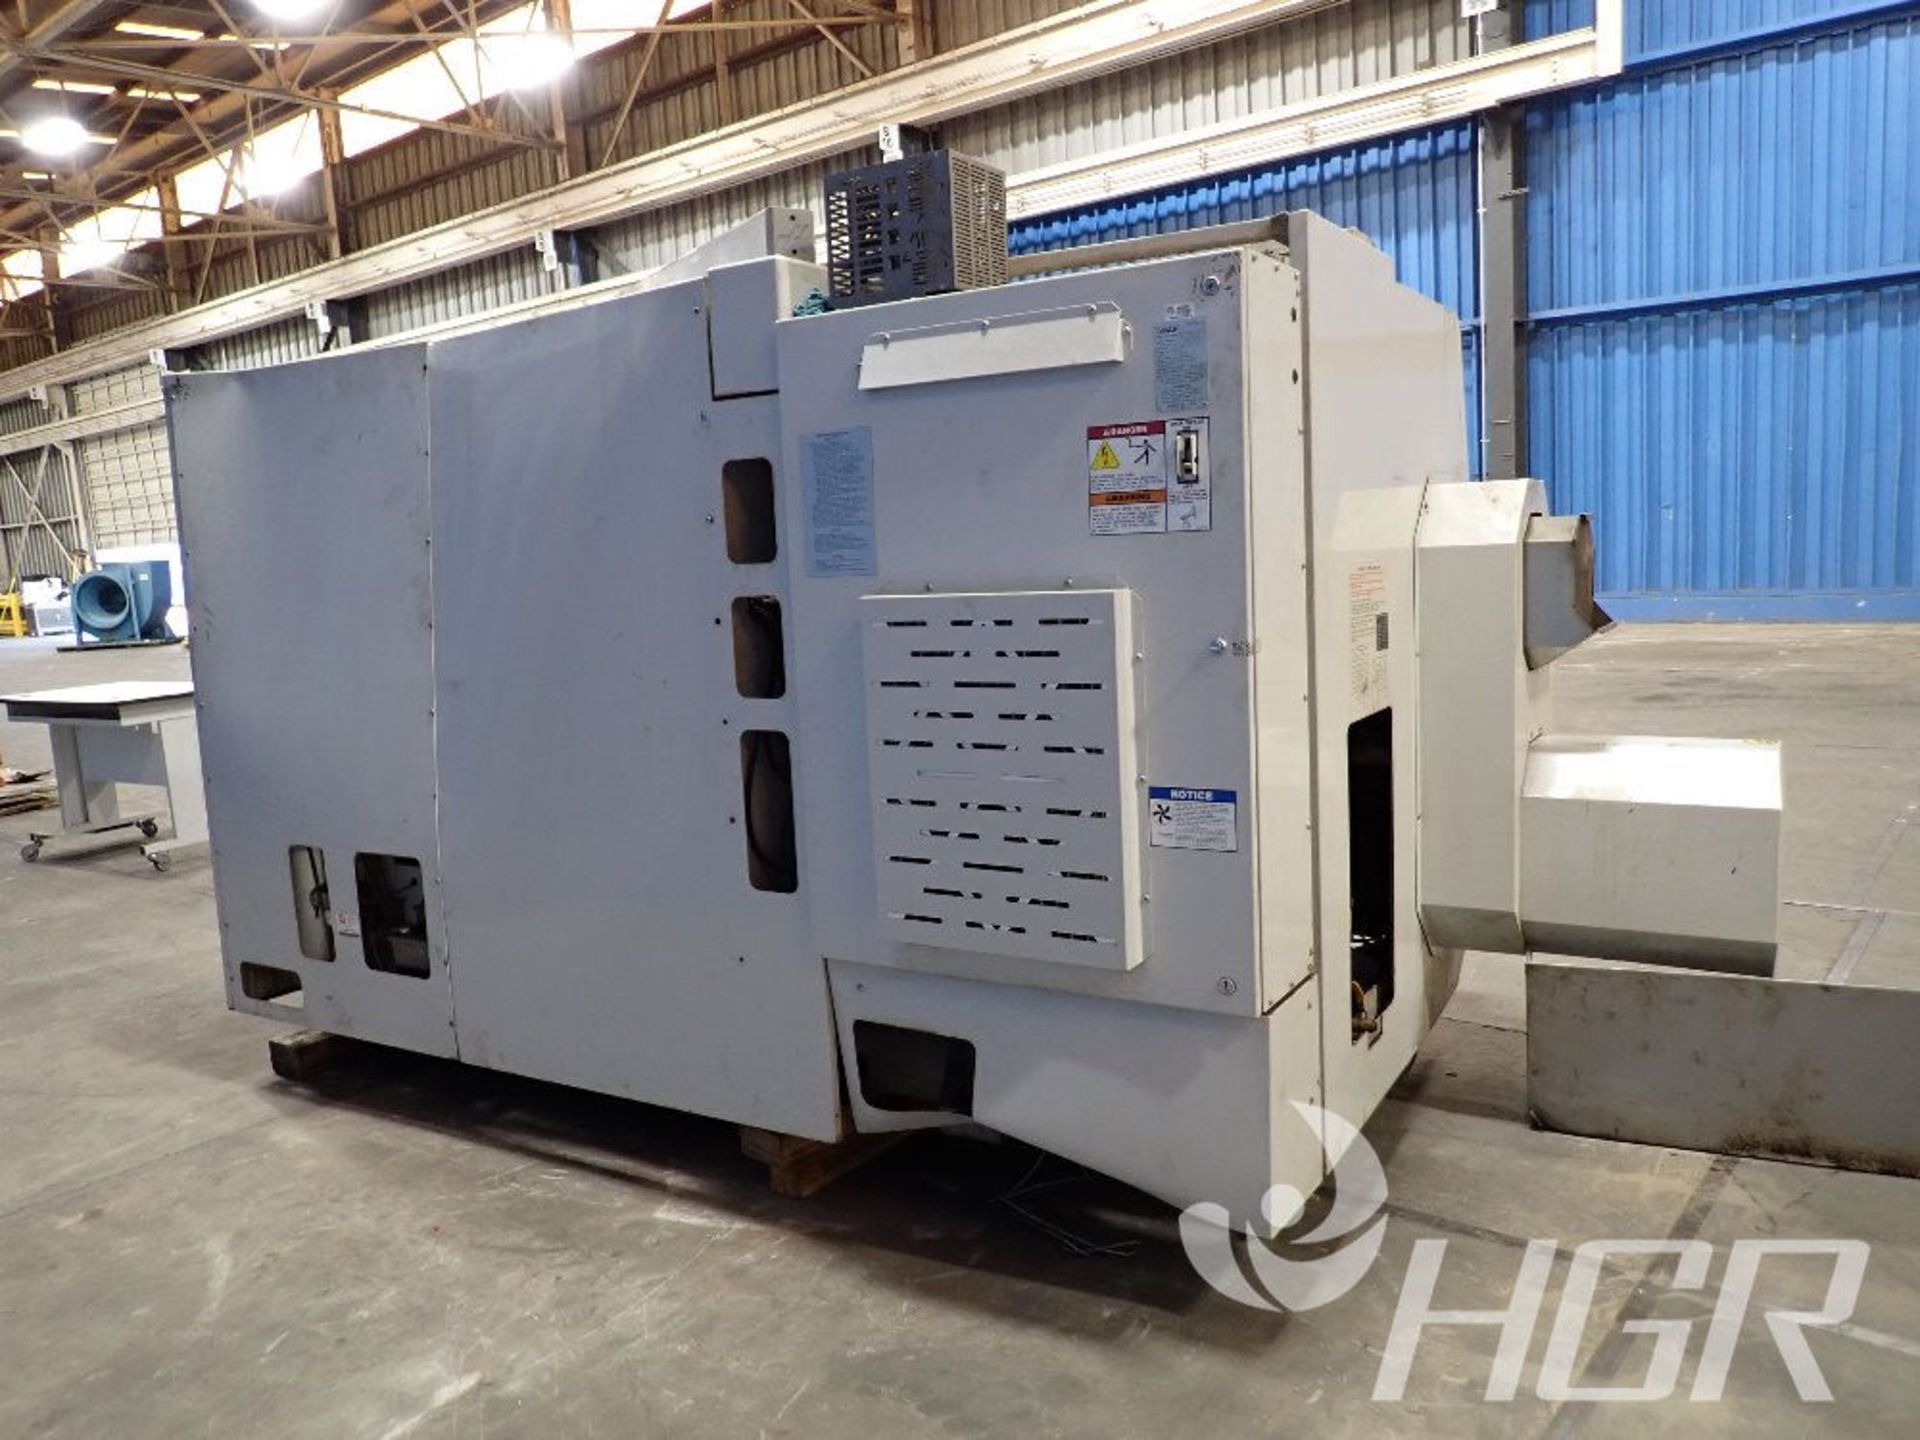 HAAS CNC LATHE, Model SL-30TB, Date: 2006; s/n 3074485, Approx. Capacity: n/a, Power: 3/50/60/208/ - Image 24 of 33